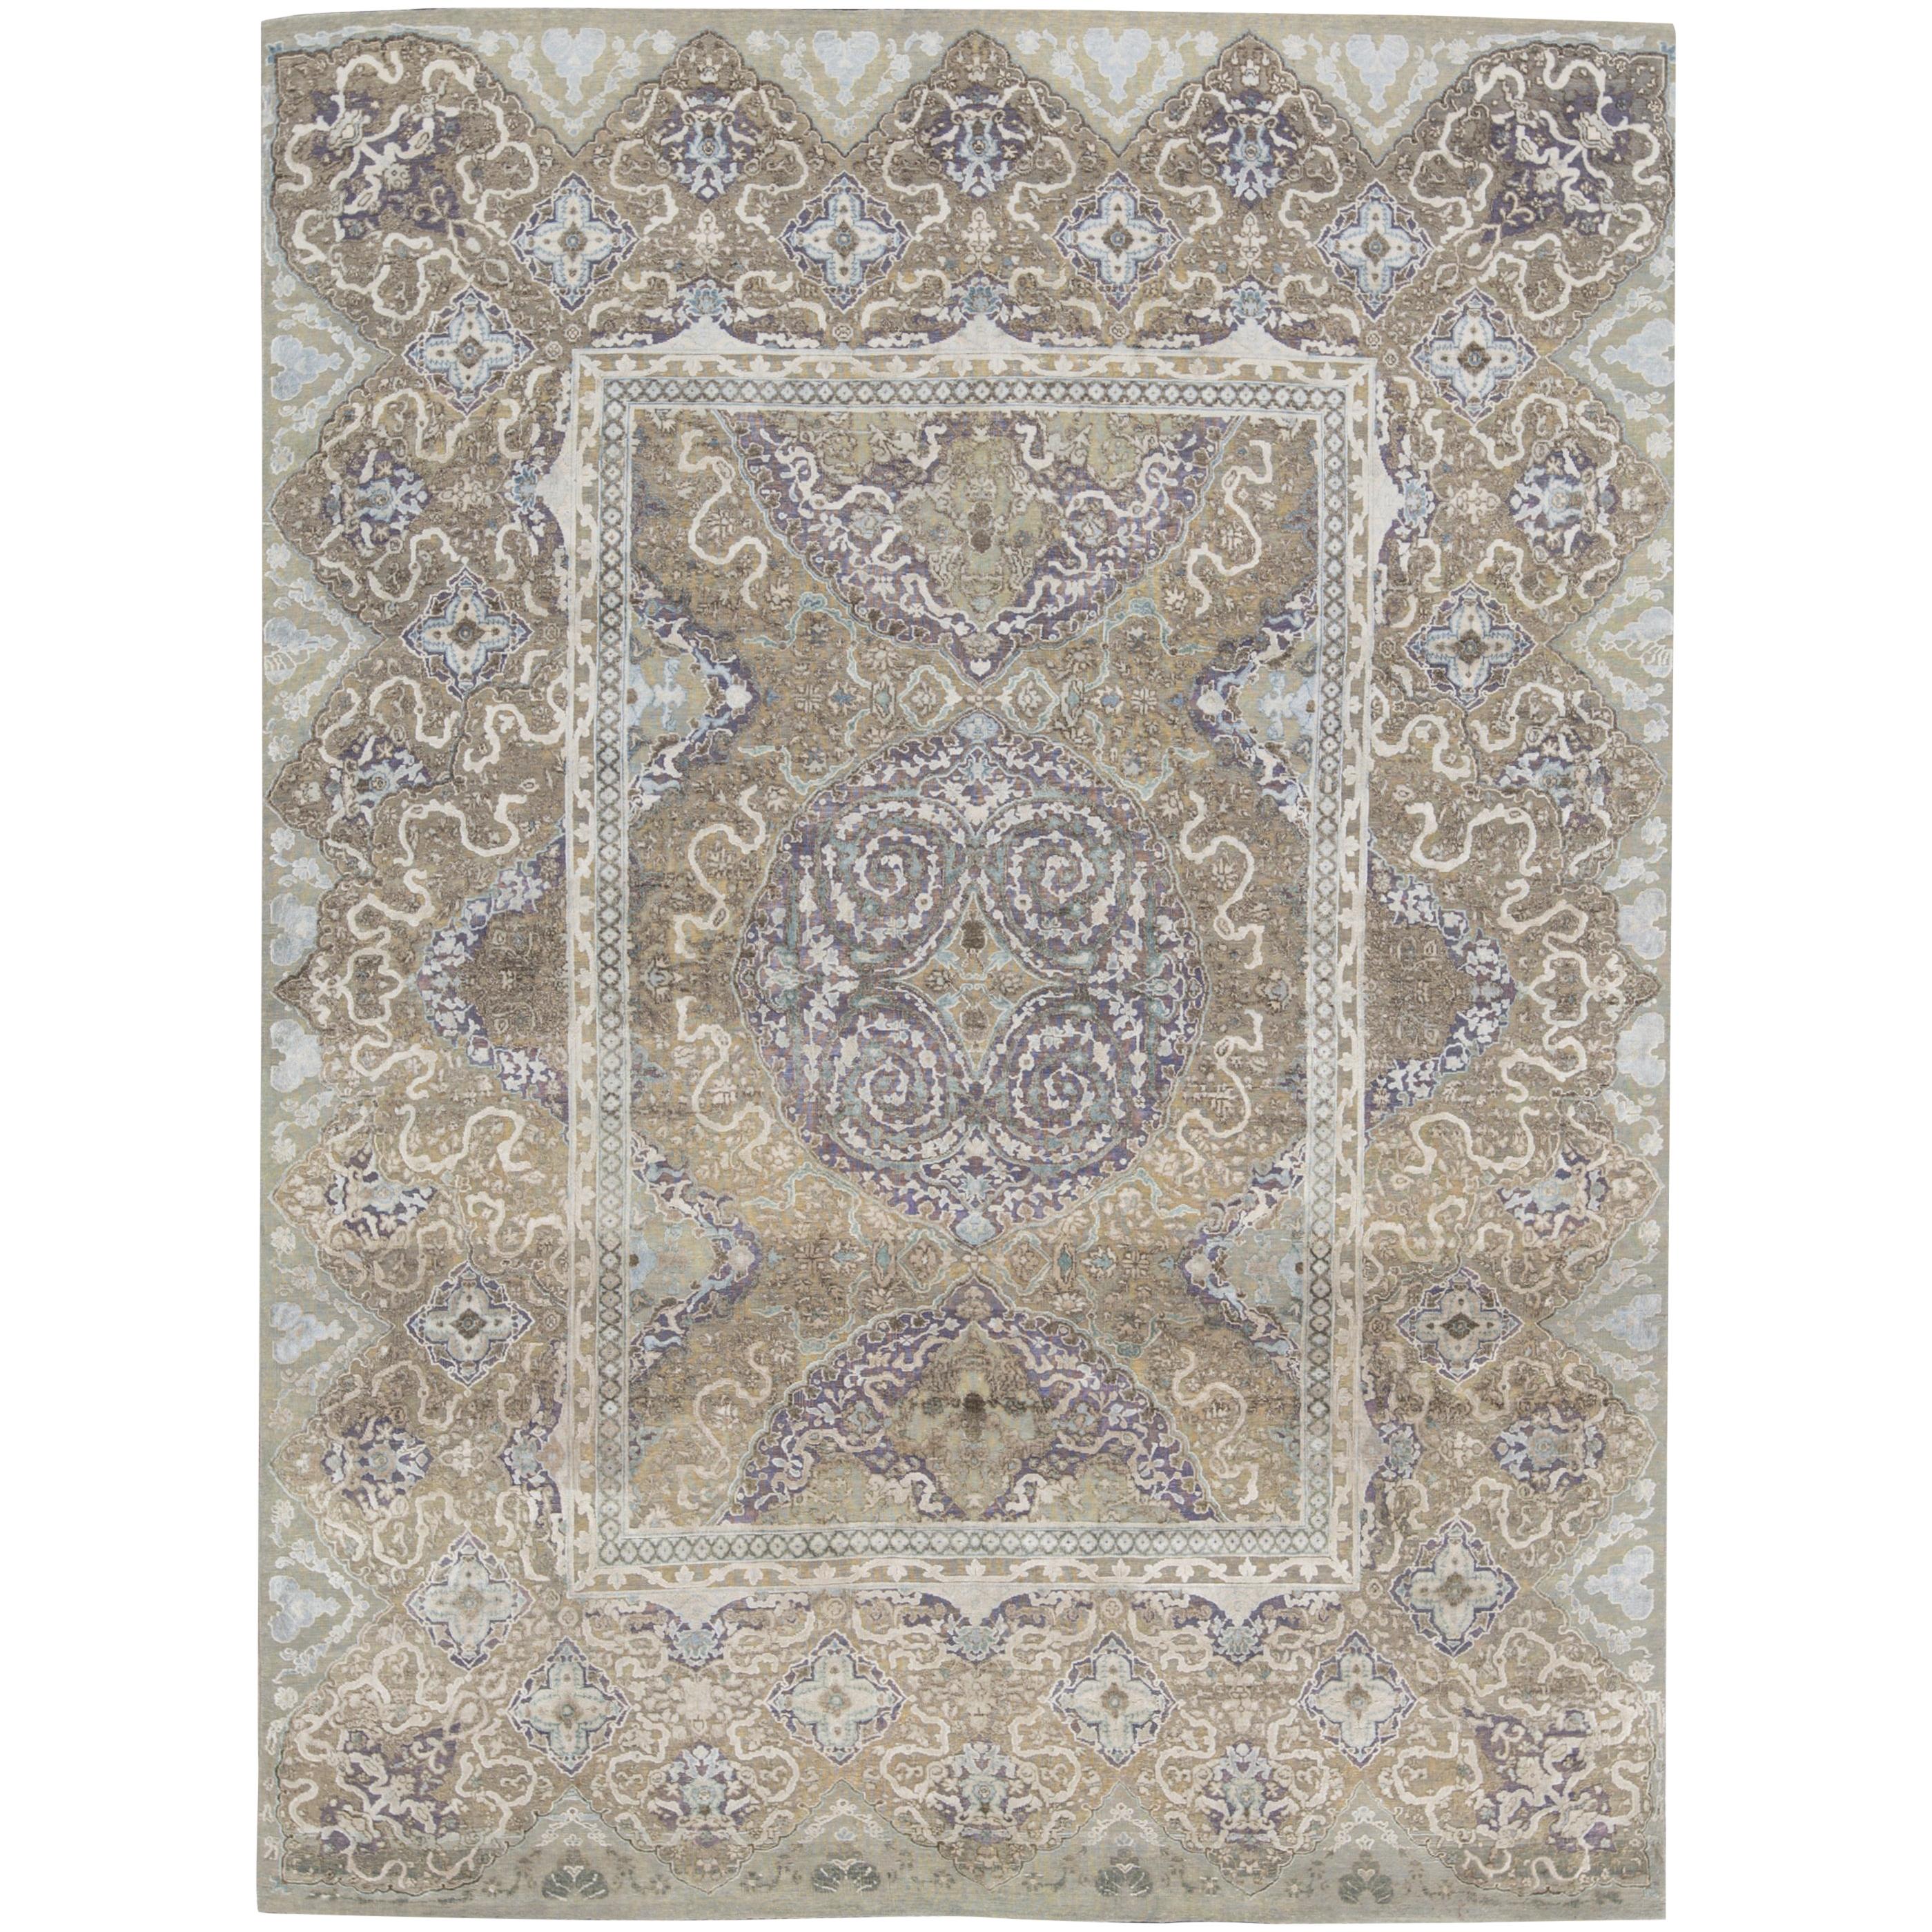 One of a Kind Transitional Handwoven Wool Area Rug  7'9 x 10'6 For Sale